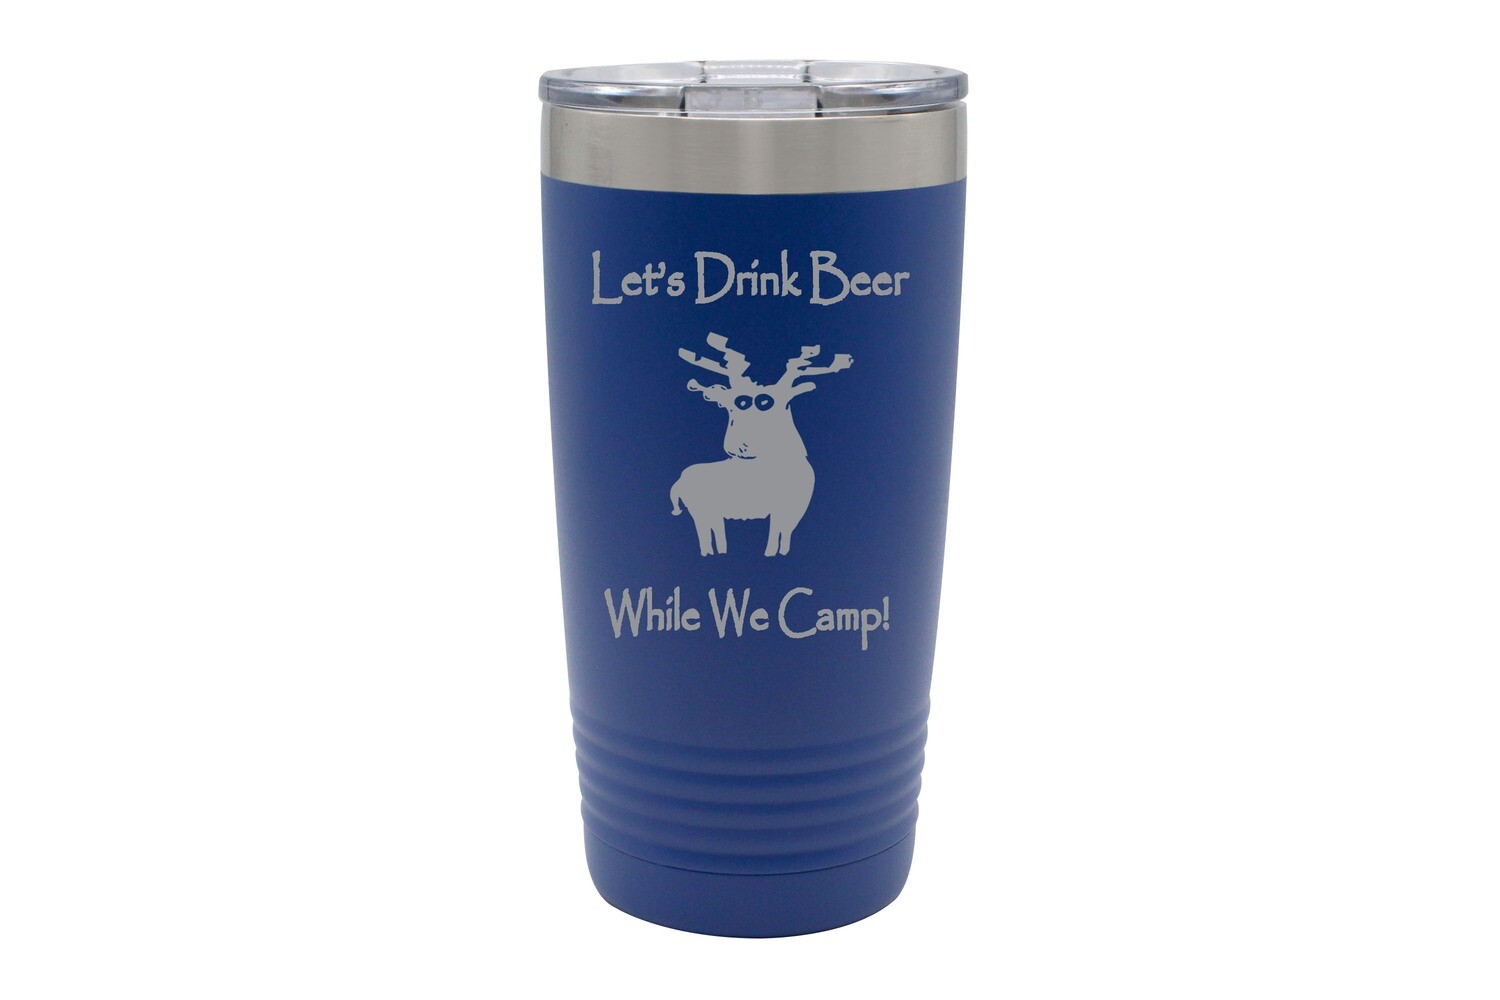 Let's drink beer while we camp Insulated Tumbler 20 oz